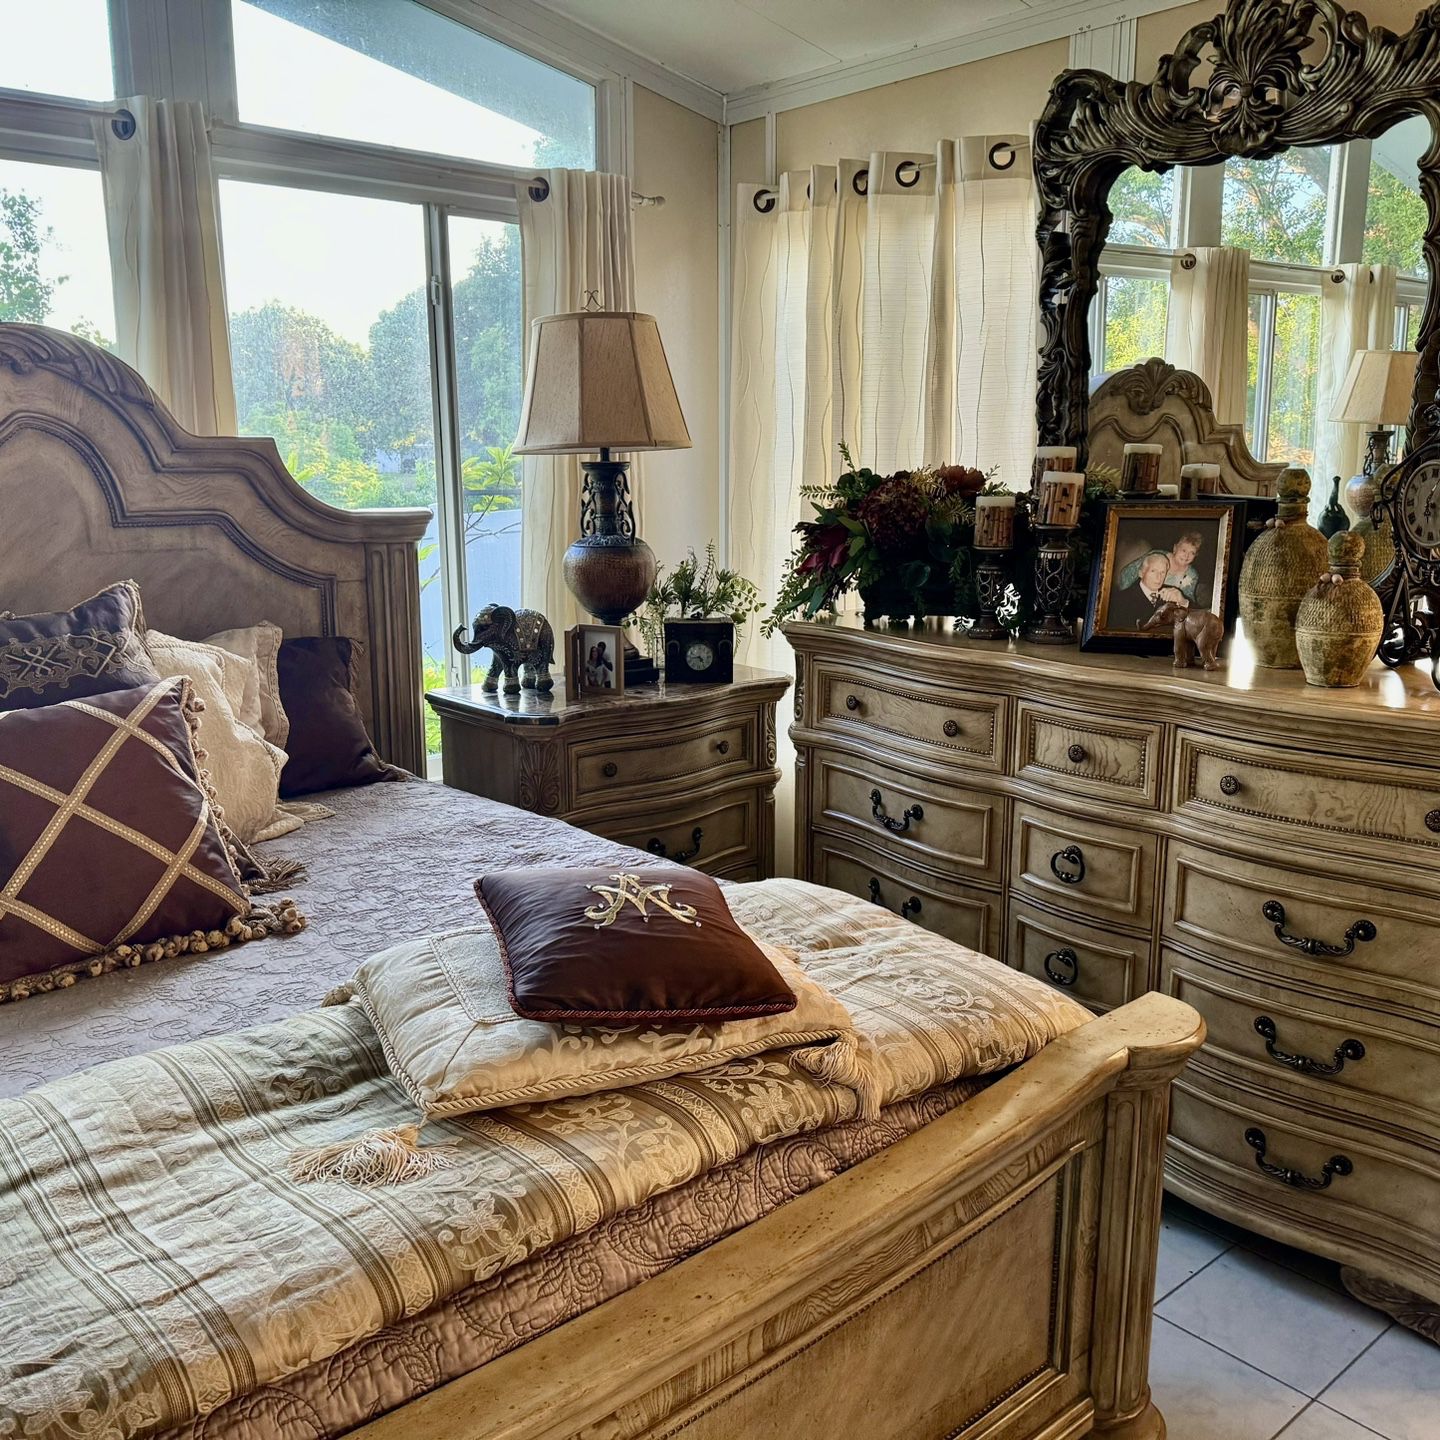 Tracy Has! A Gorgeous! King Size Bedroom Set By “ Kevin Charles “.